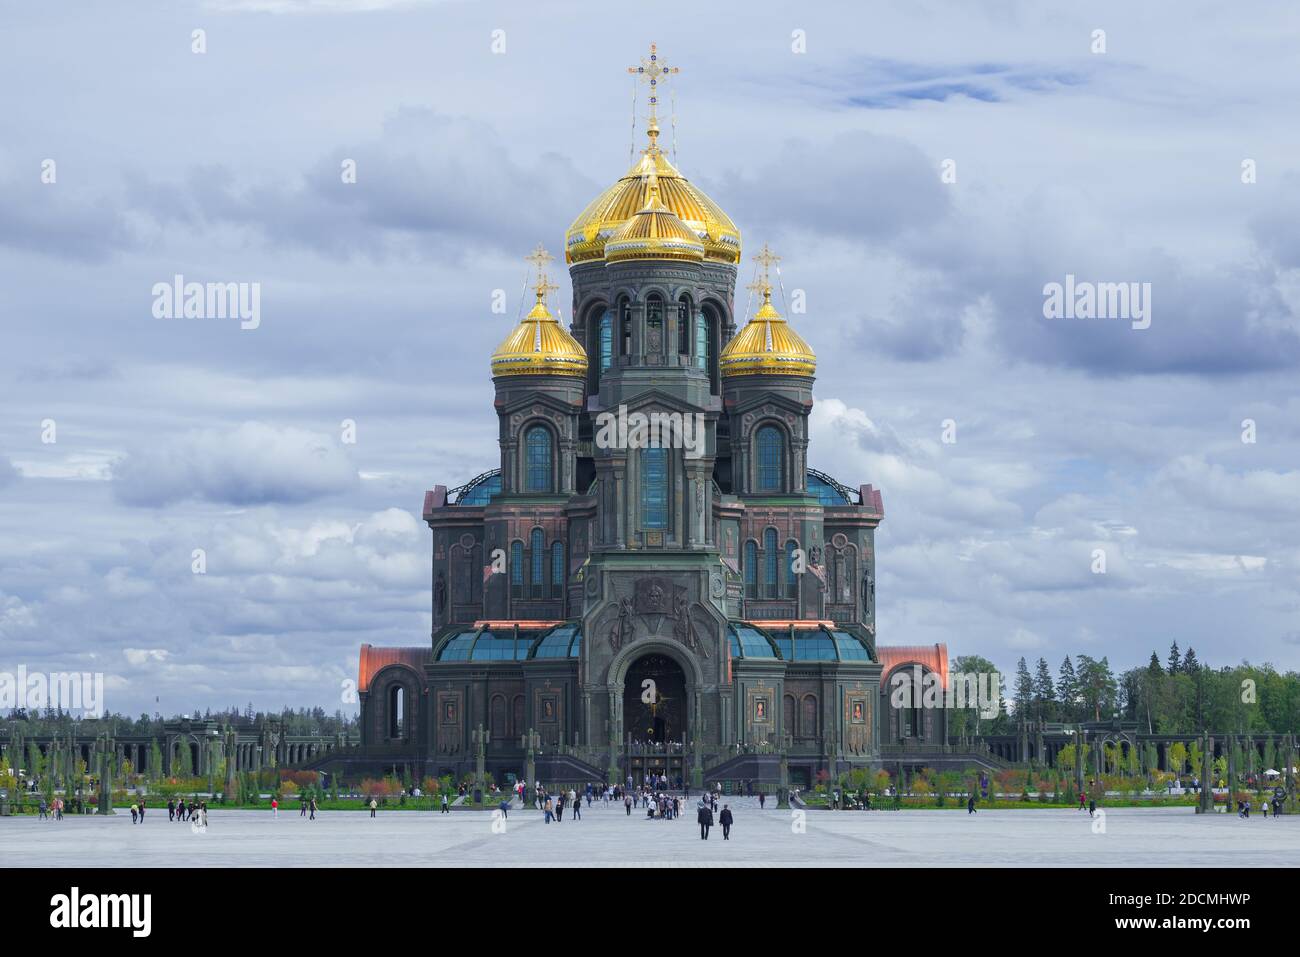 MOSCOW REGION, RUSSIA - AUGUST 27, 2020: View of the Main Temple of the Armed Forces of the Russian Federation on a cloudy August day Stock Photo